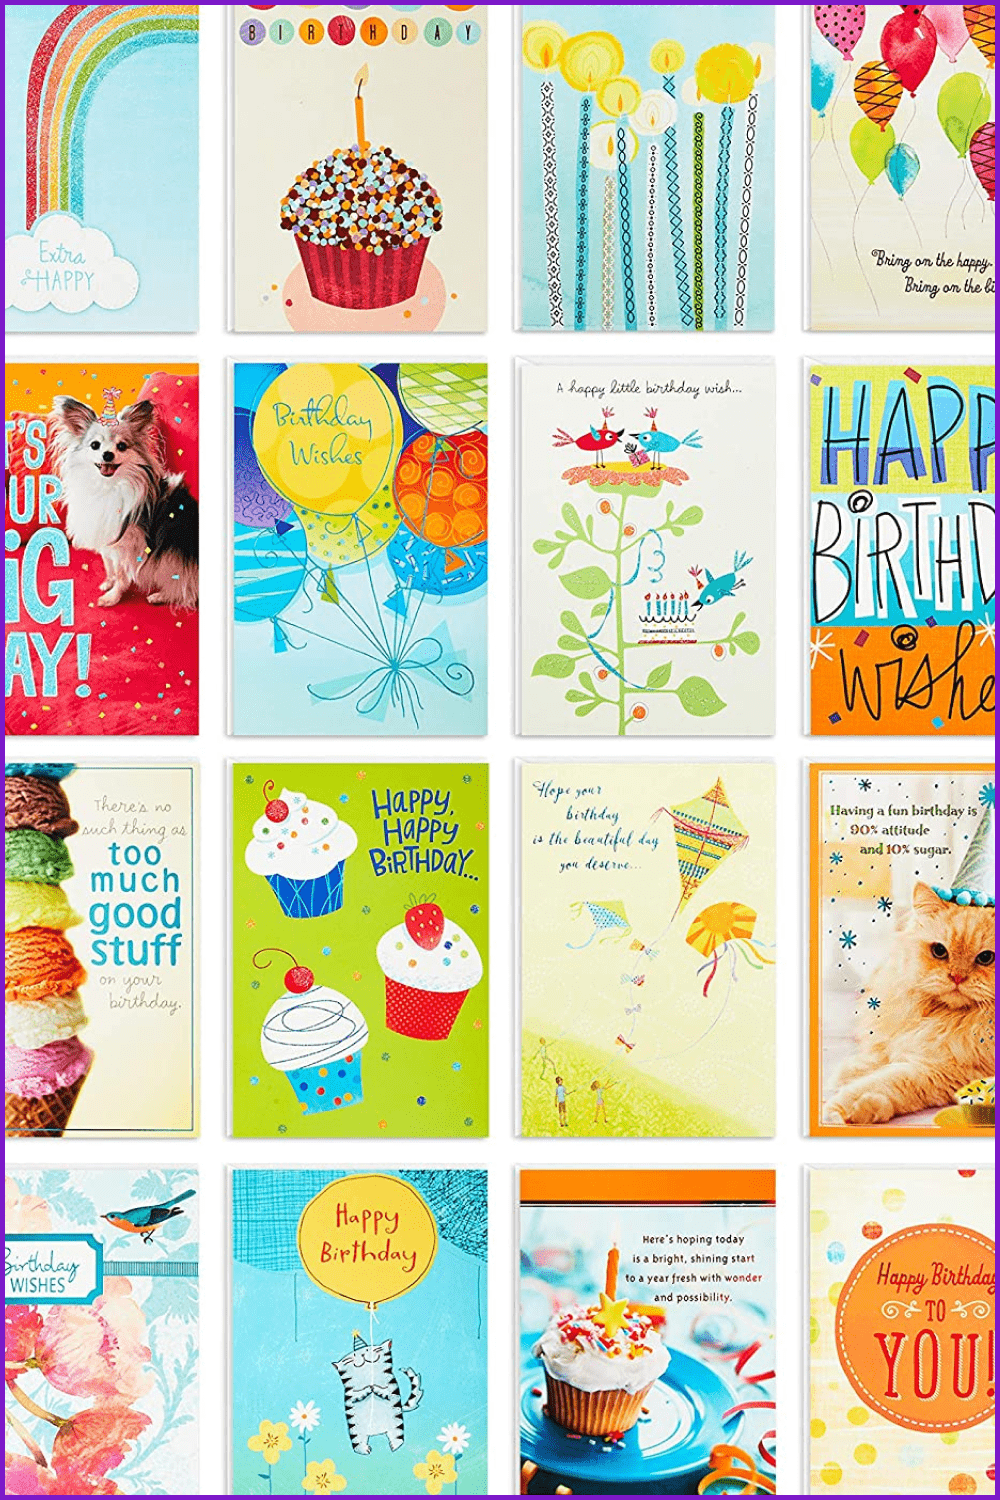 Collage of birthday cards with balloons, candles, cakes and animals.